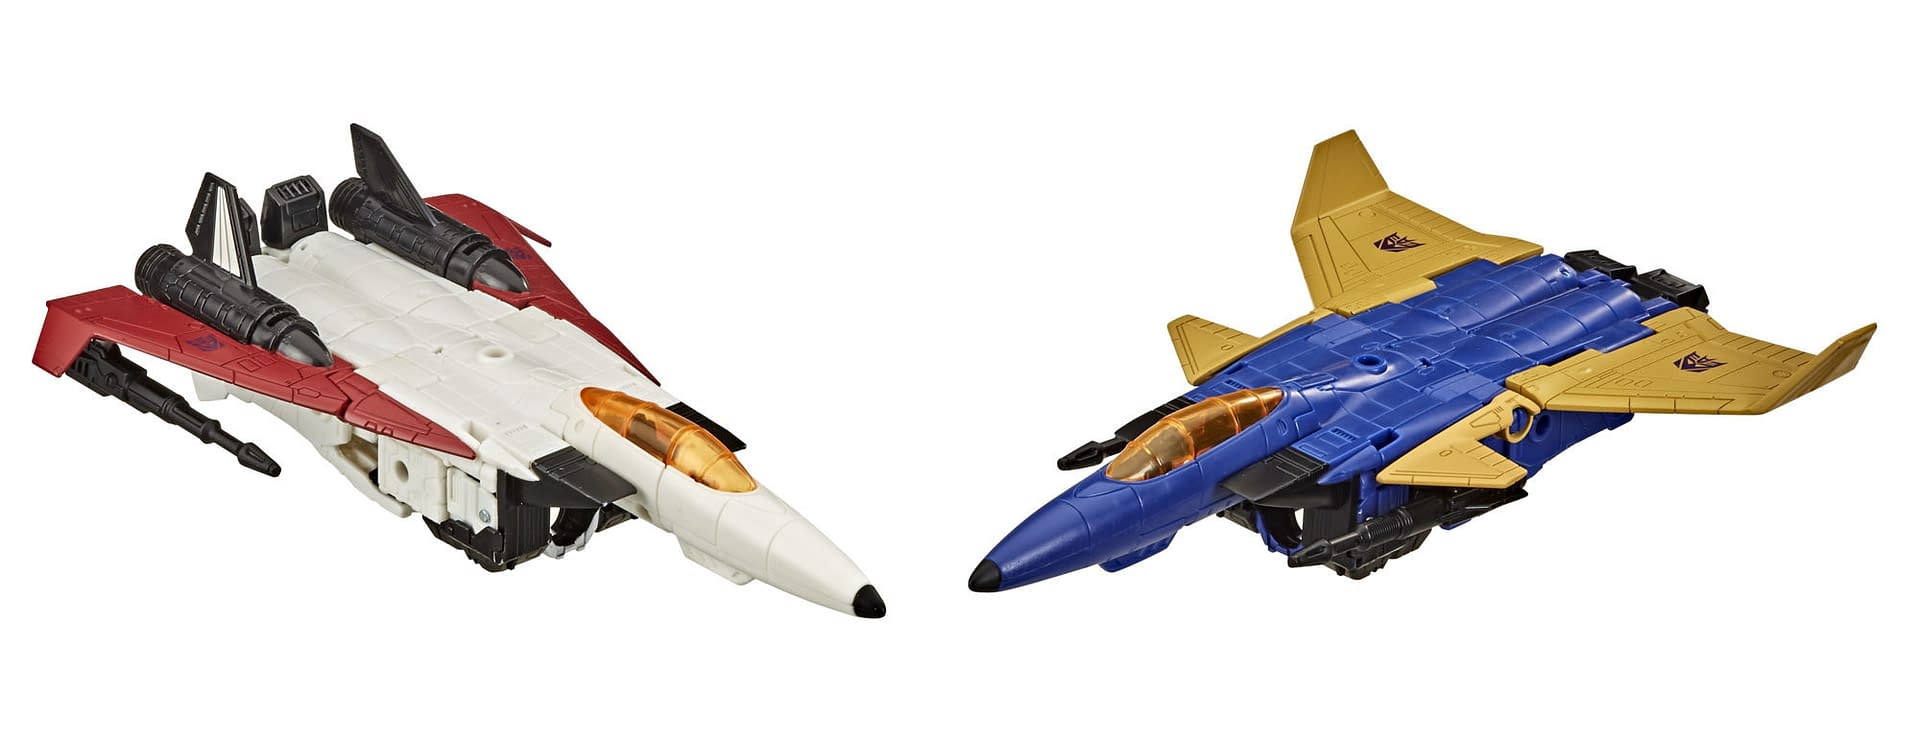 Transformers Get Some Amazon Exclusive 2-Packs from Hasbro